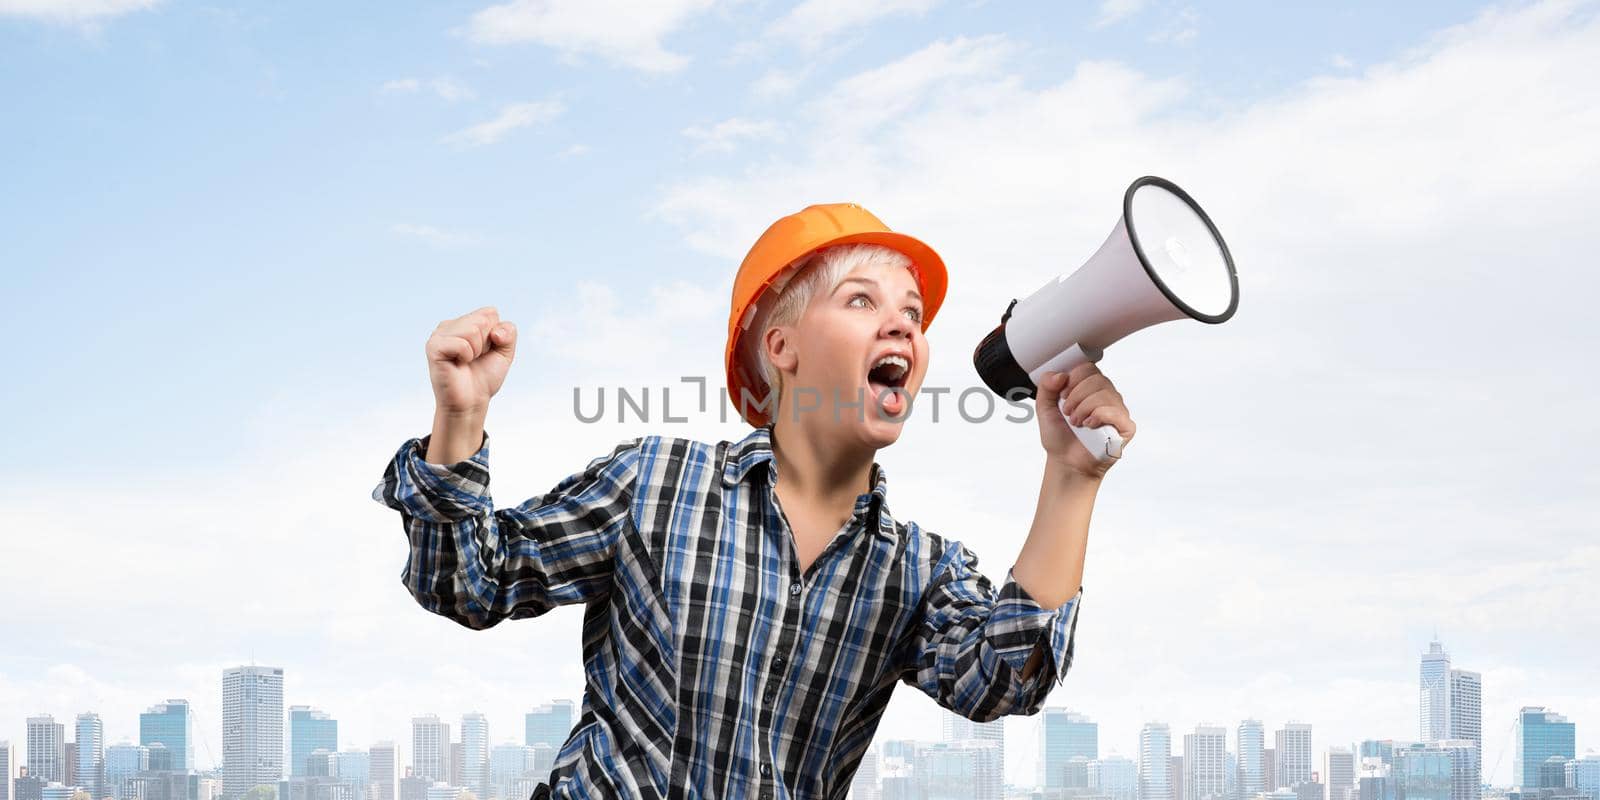 Expressive woman in safety helmet shouting into megaphone. Portrait of young emotional construction worker with wide open mouth on background of modern city. News announcement and advertisement.